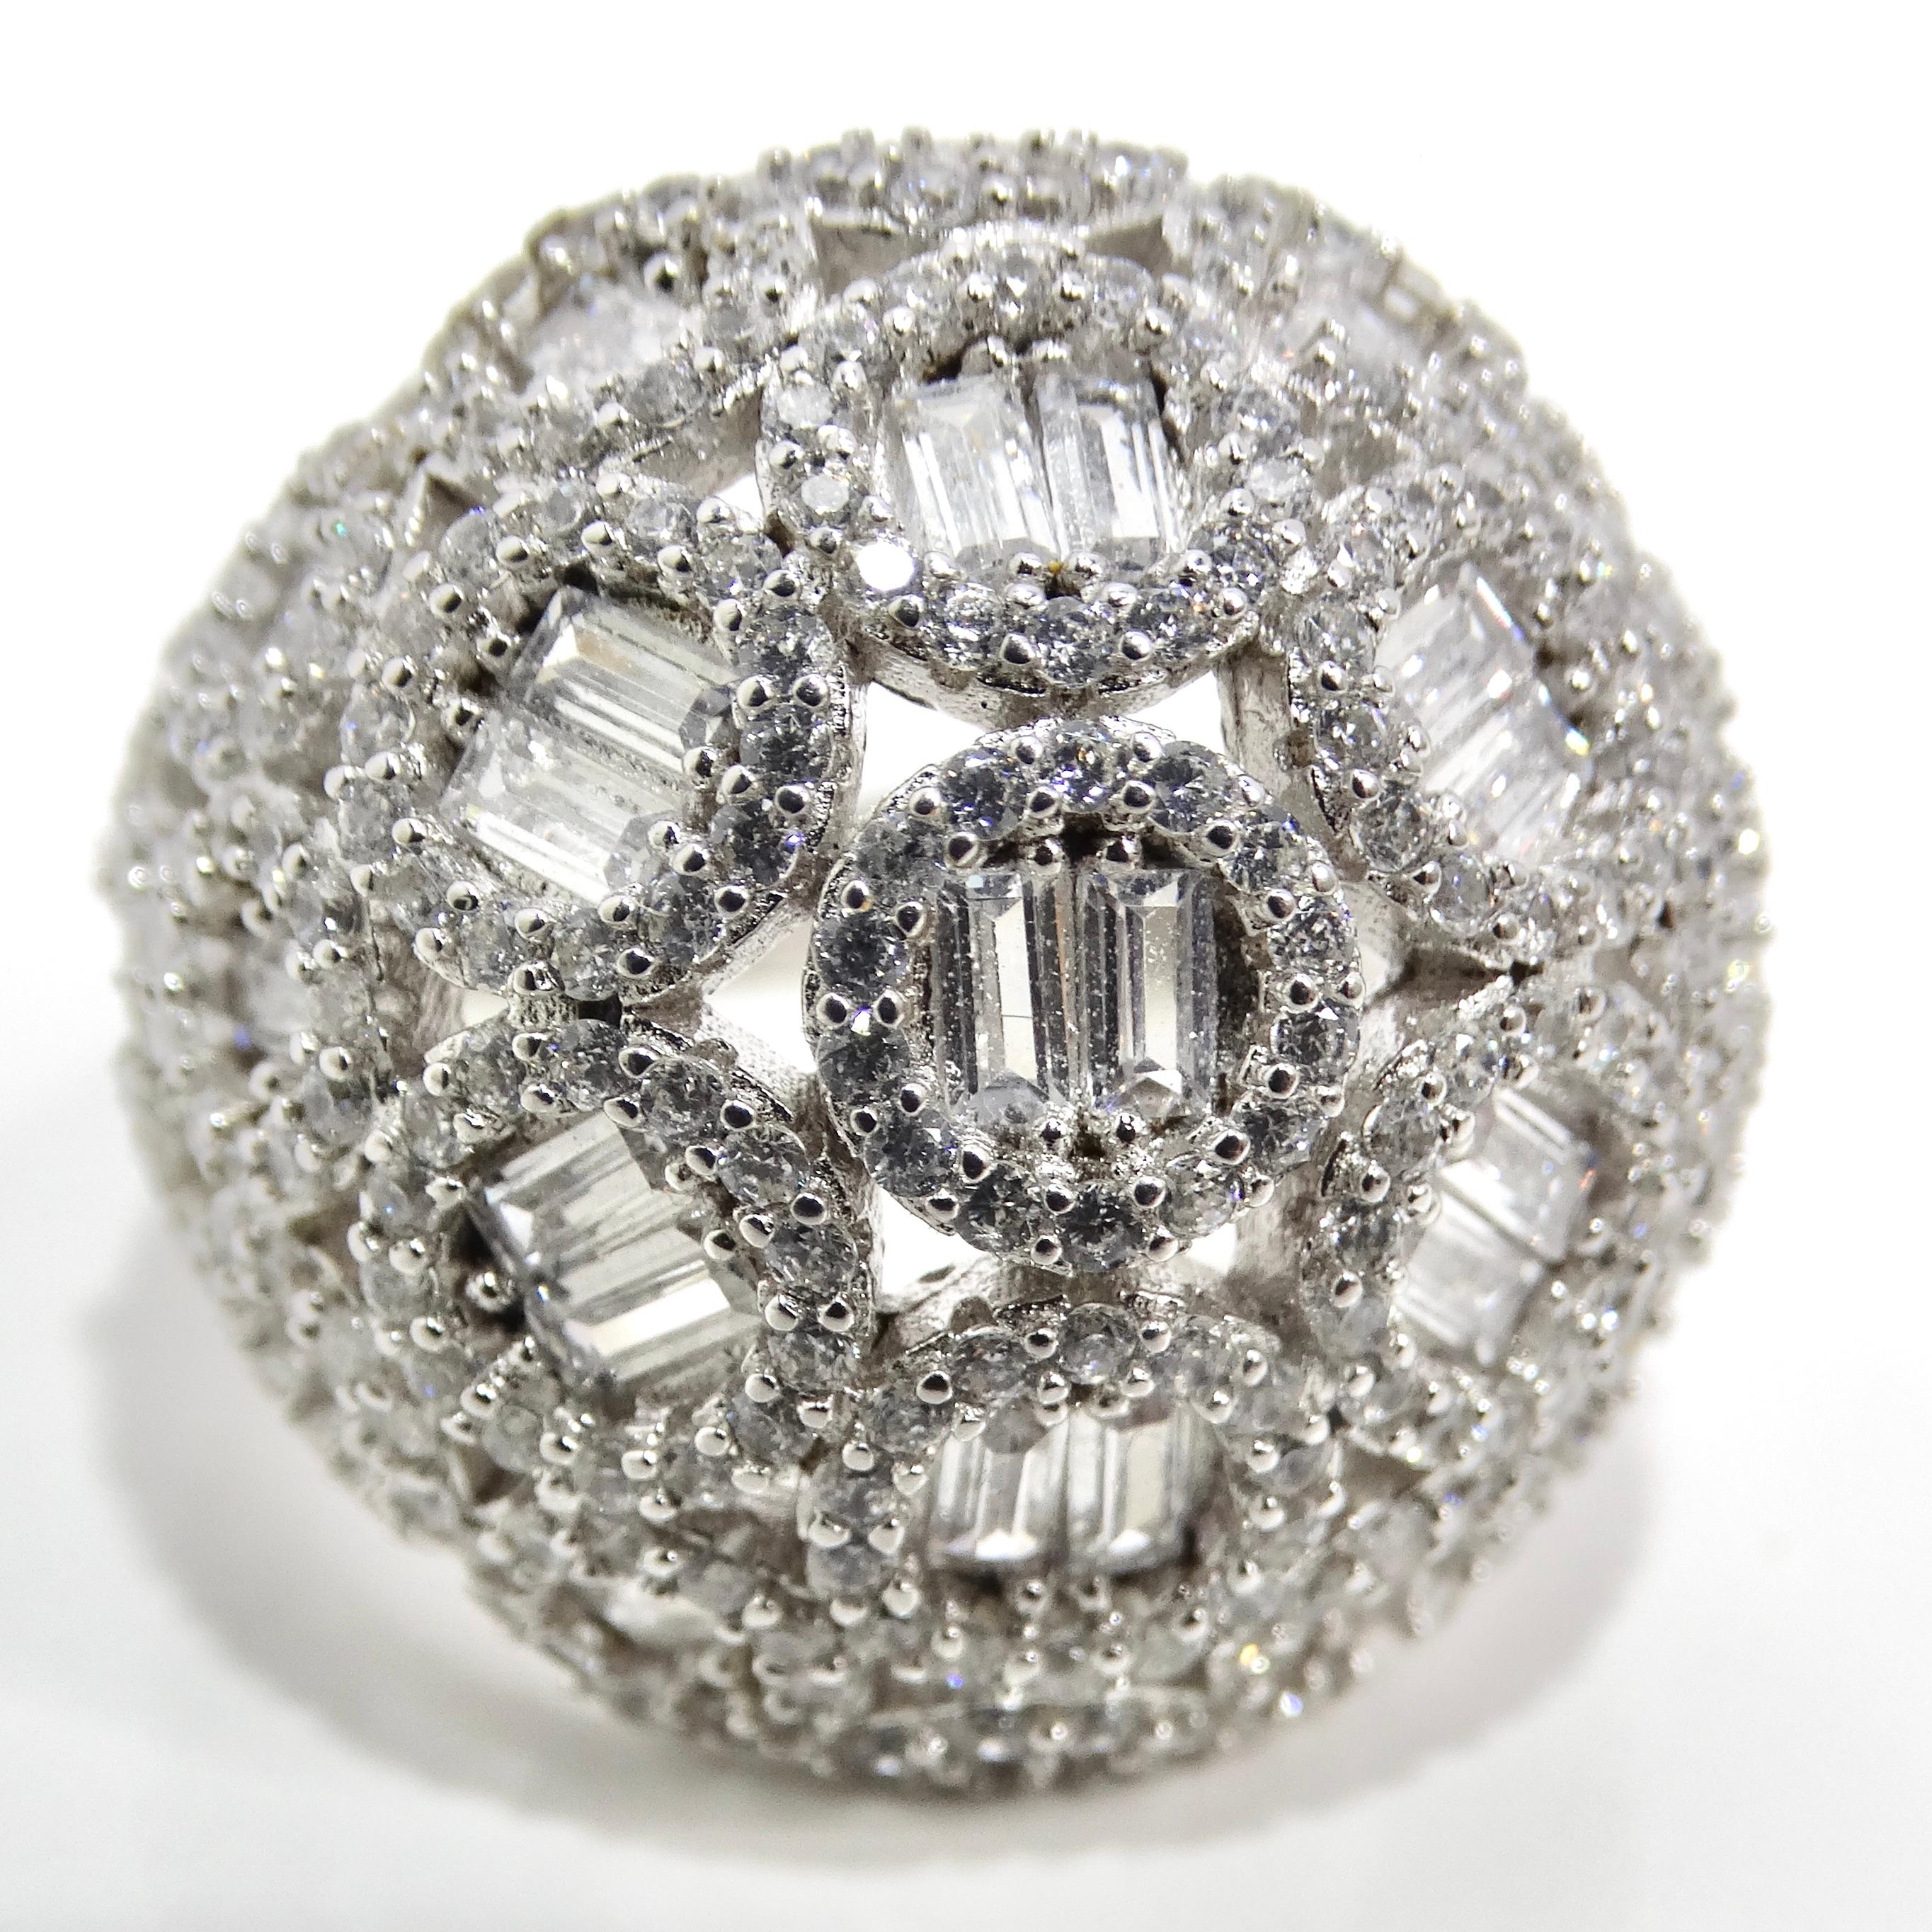 Indulge in the nostalgic allure of the 1990s with the mesmerizing 1990s Silver Swarovski Crystal Dome Ring. This exquisite piece of jewelry takes you on a journey back in time with its stunning design and timeless elegance. The ring features a